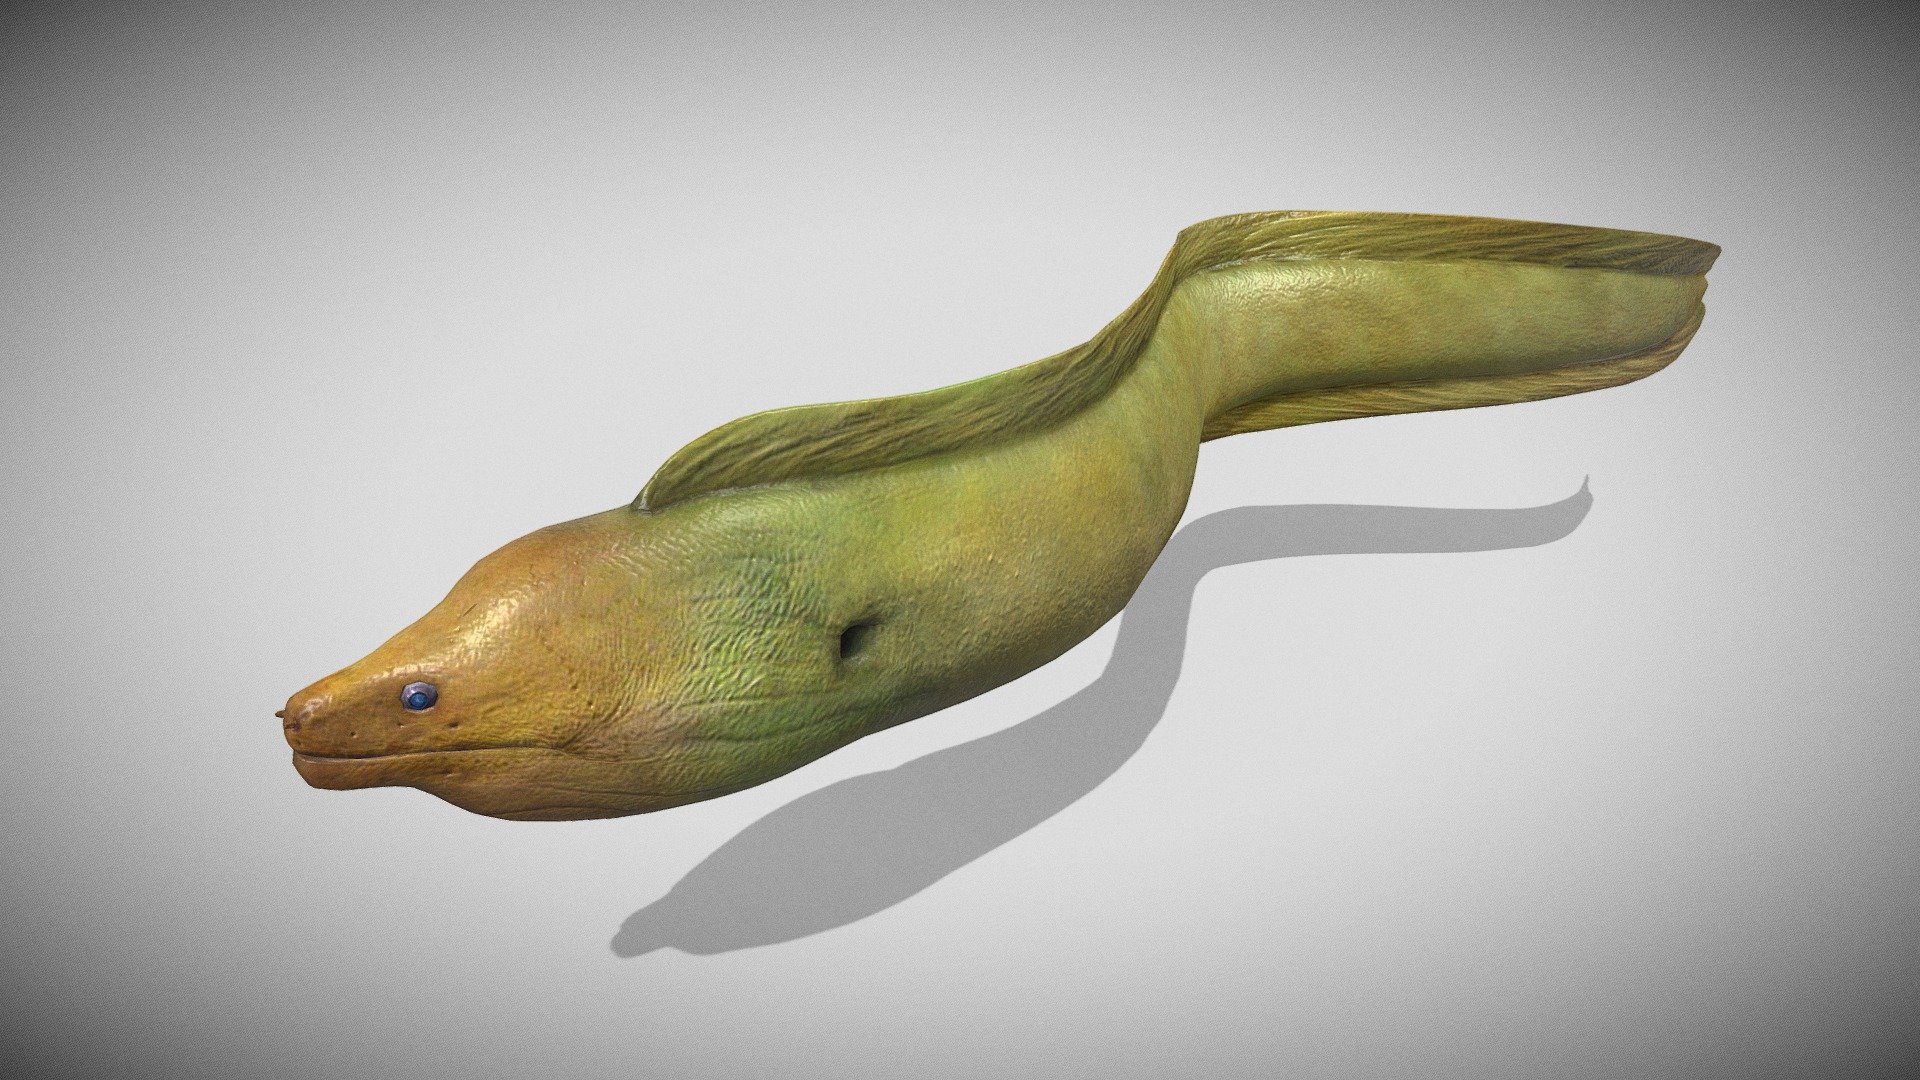 Realistic 3D model of a Yellow Moray Eel.

This 3D model can be licensed from MotionCow by Educators, 3D Artists and App Developers 3d model